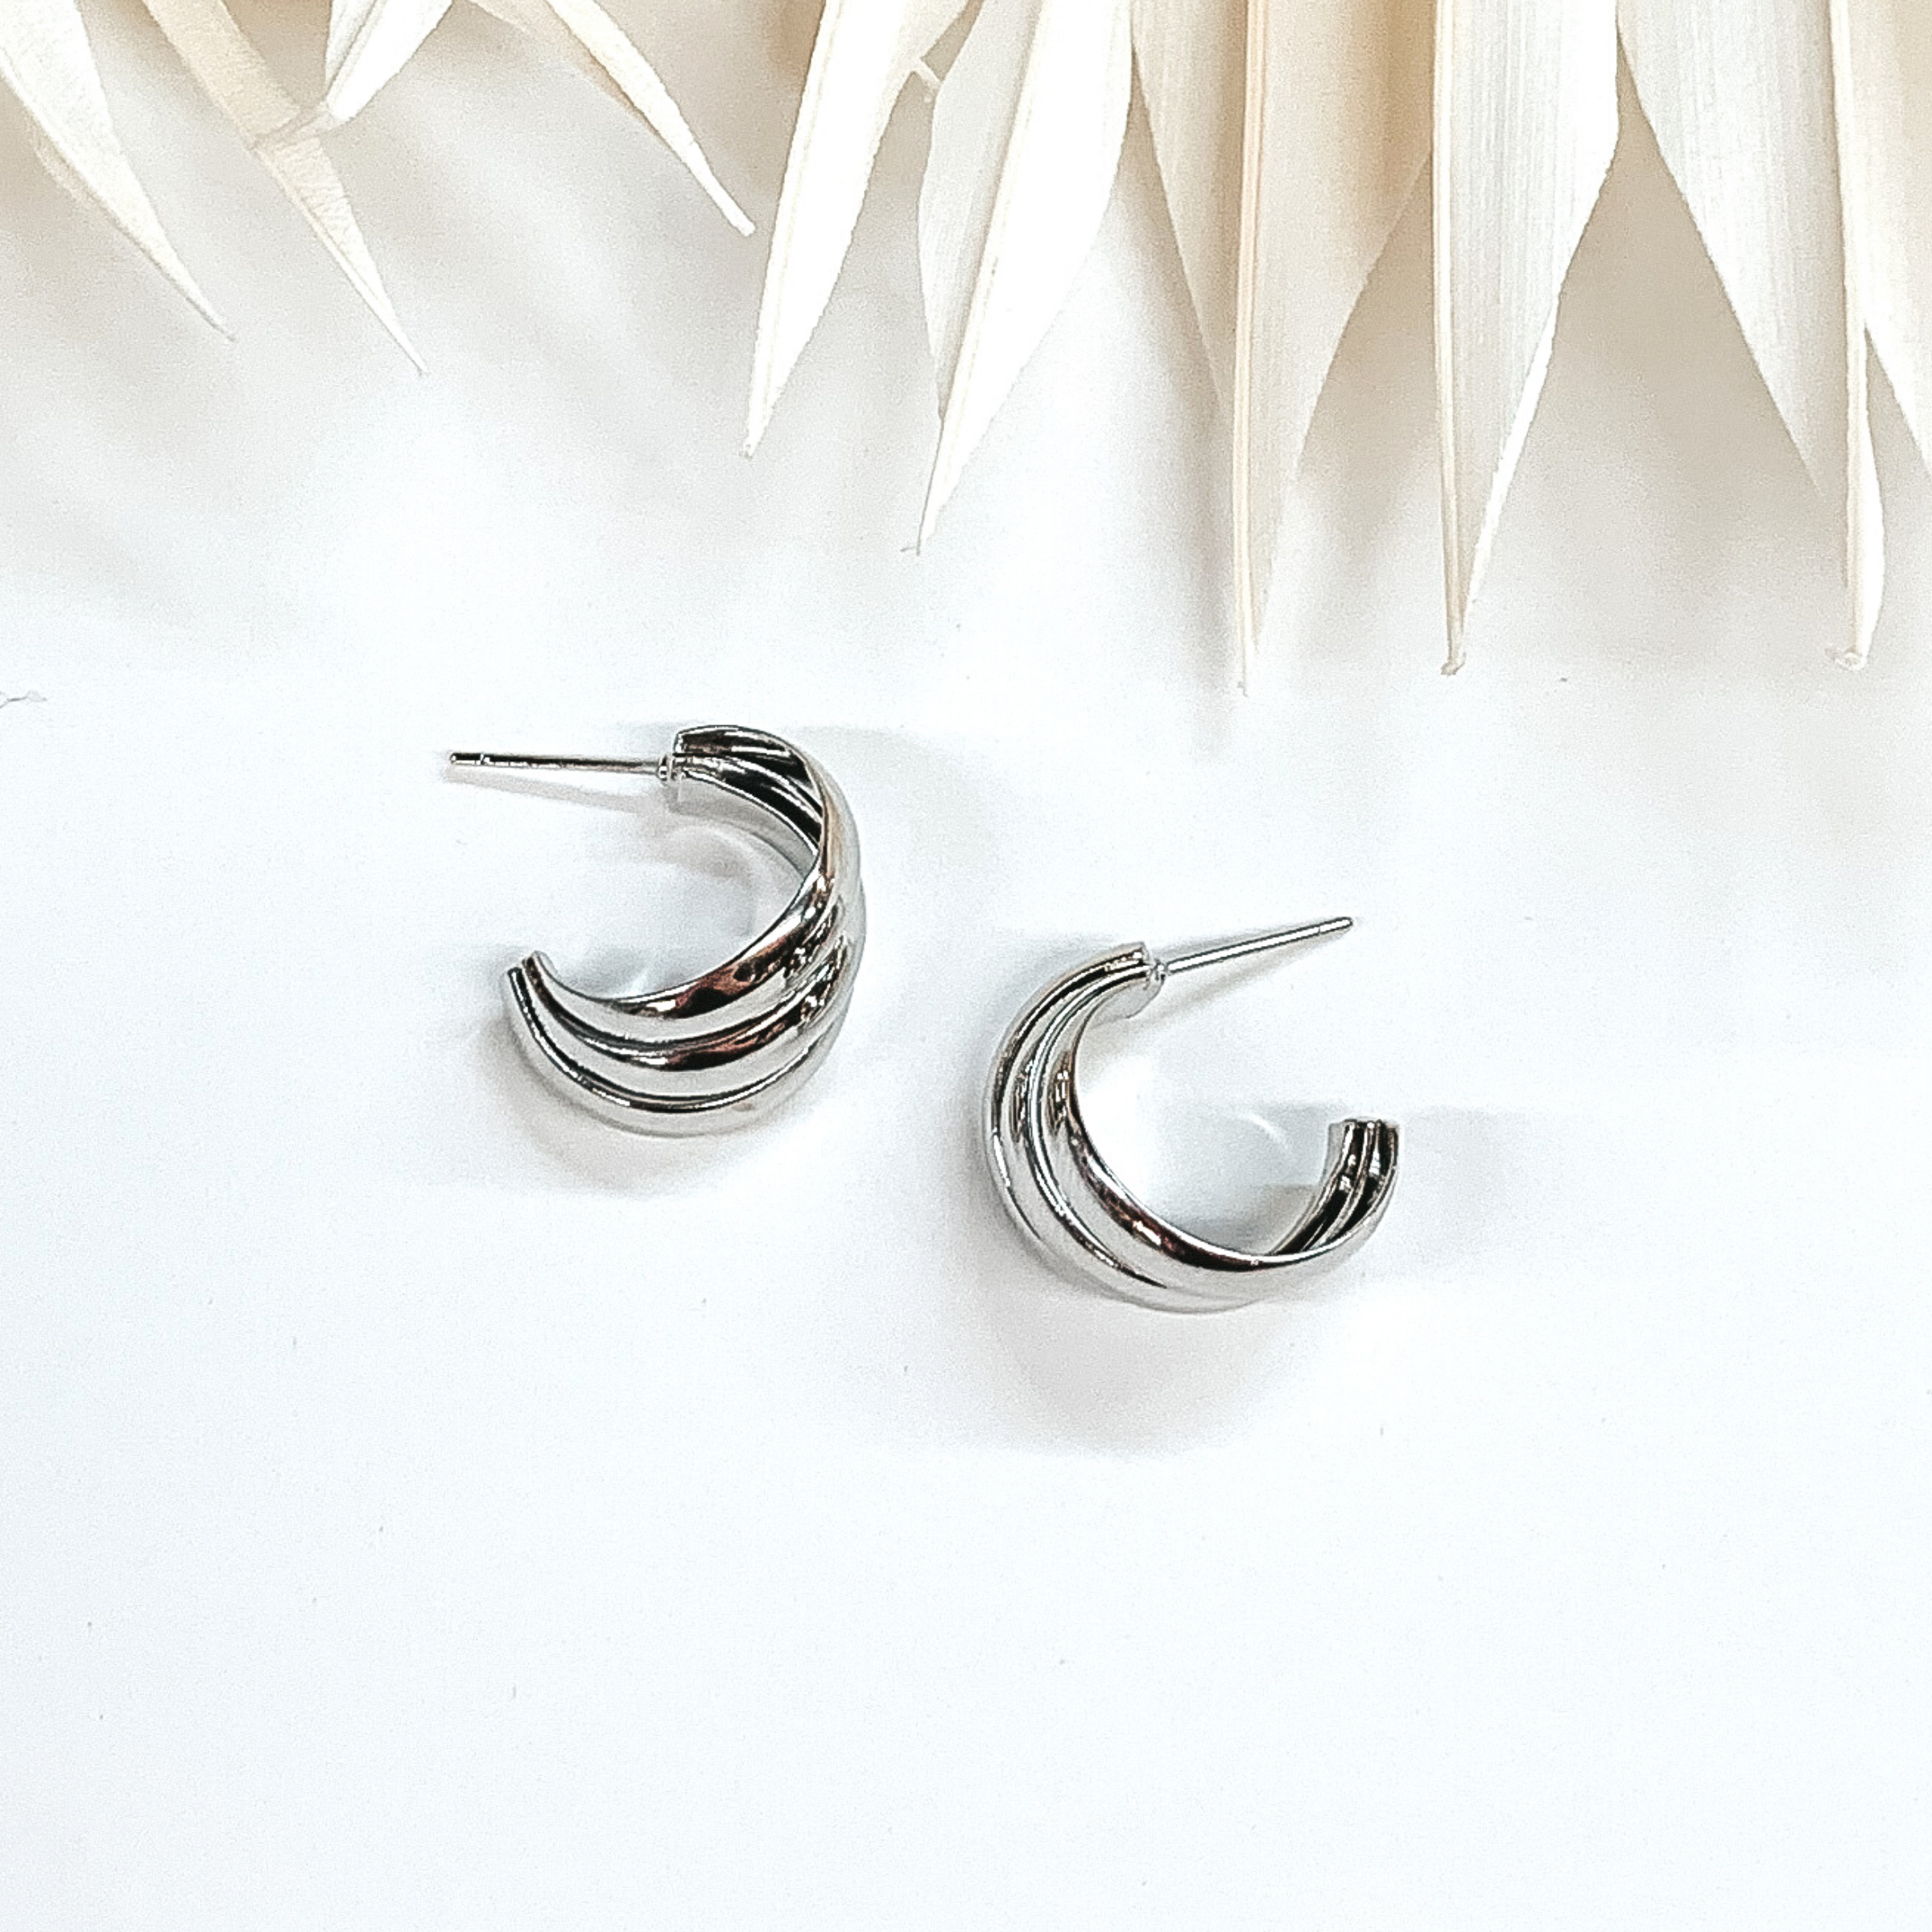 Triple Layered Hoop Earrings in Silver Tone - Giddy Up Glamour Boutique